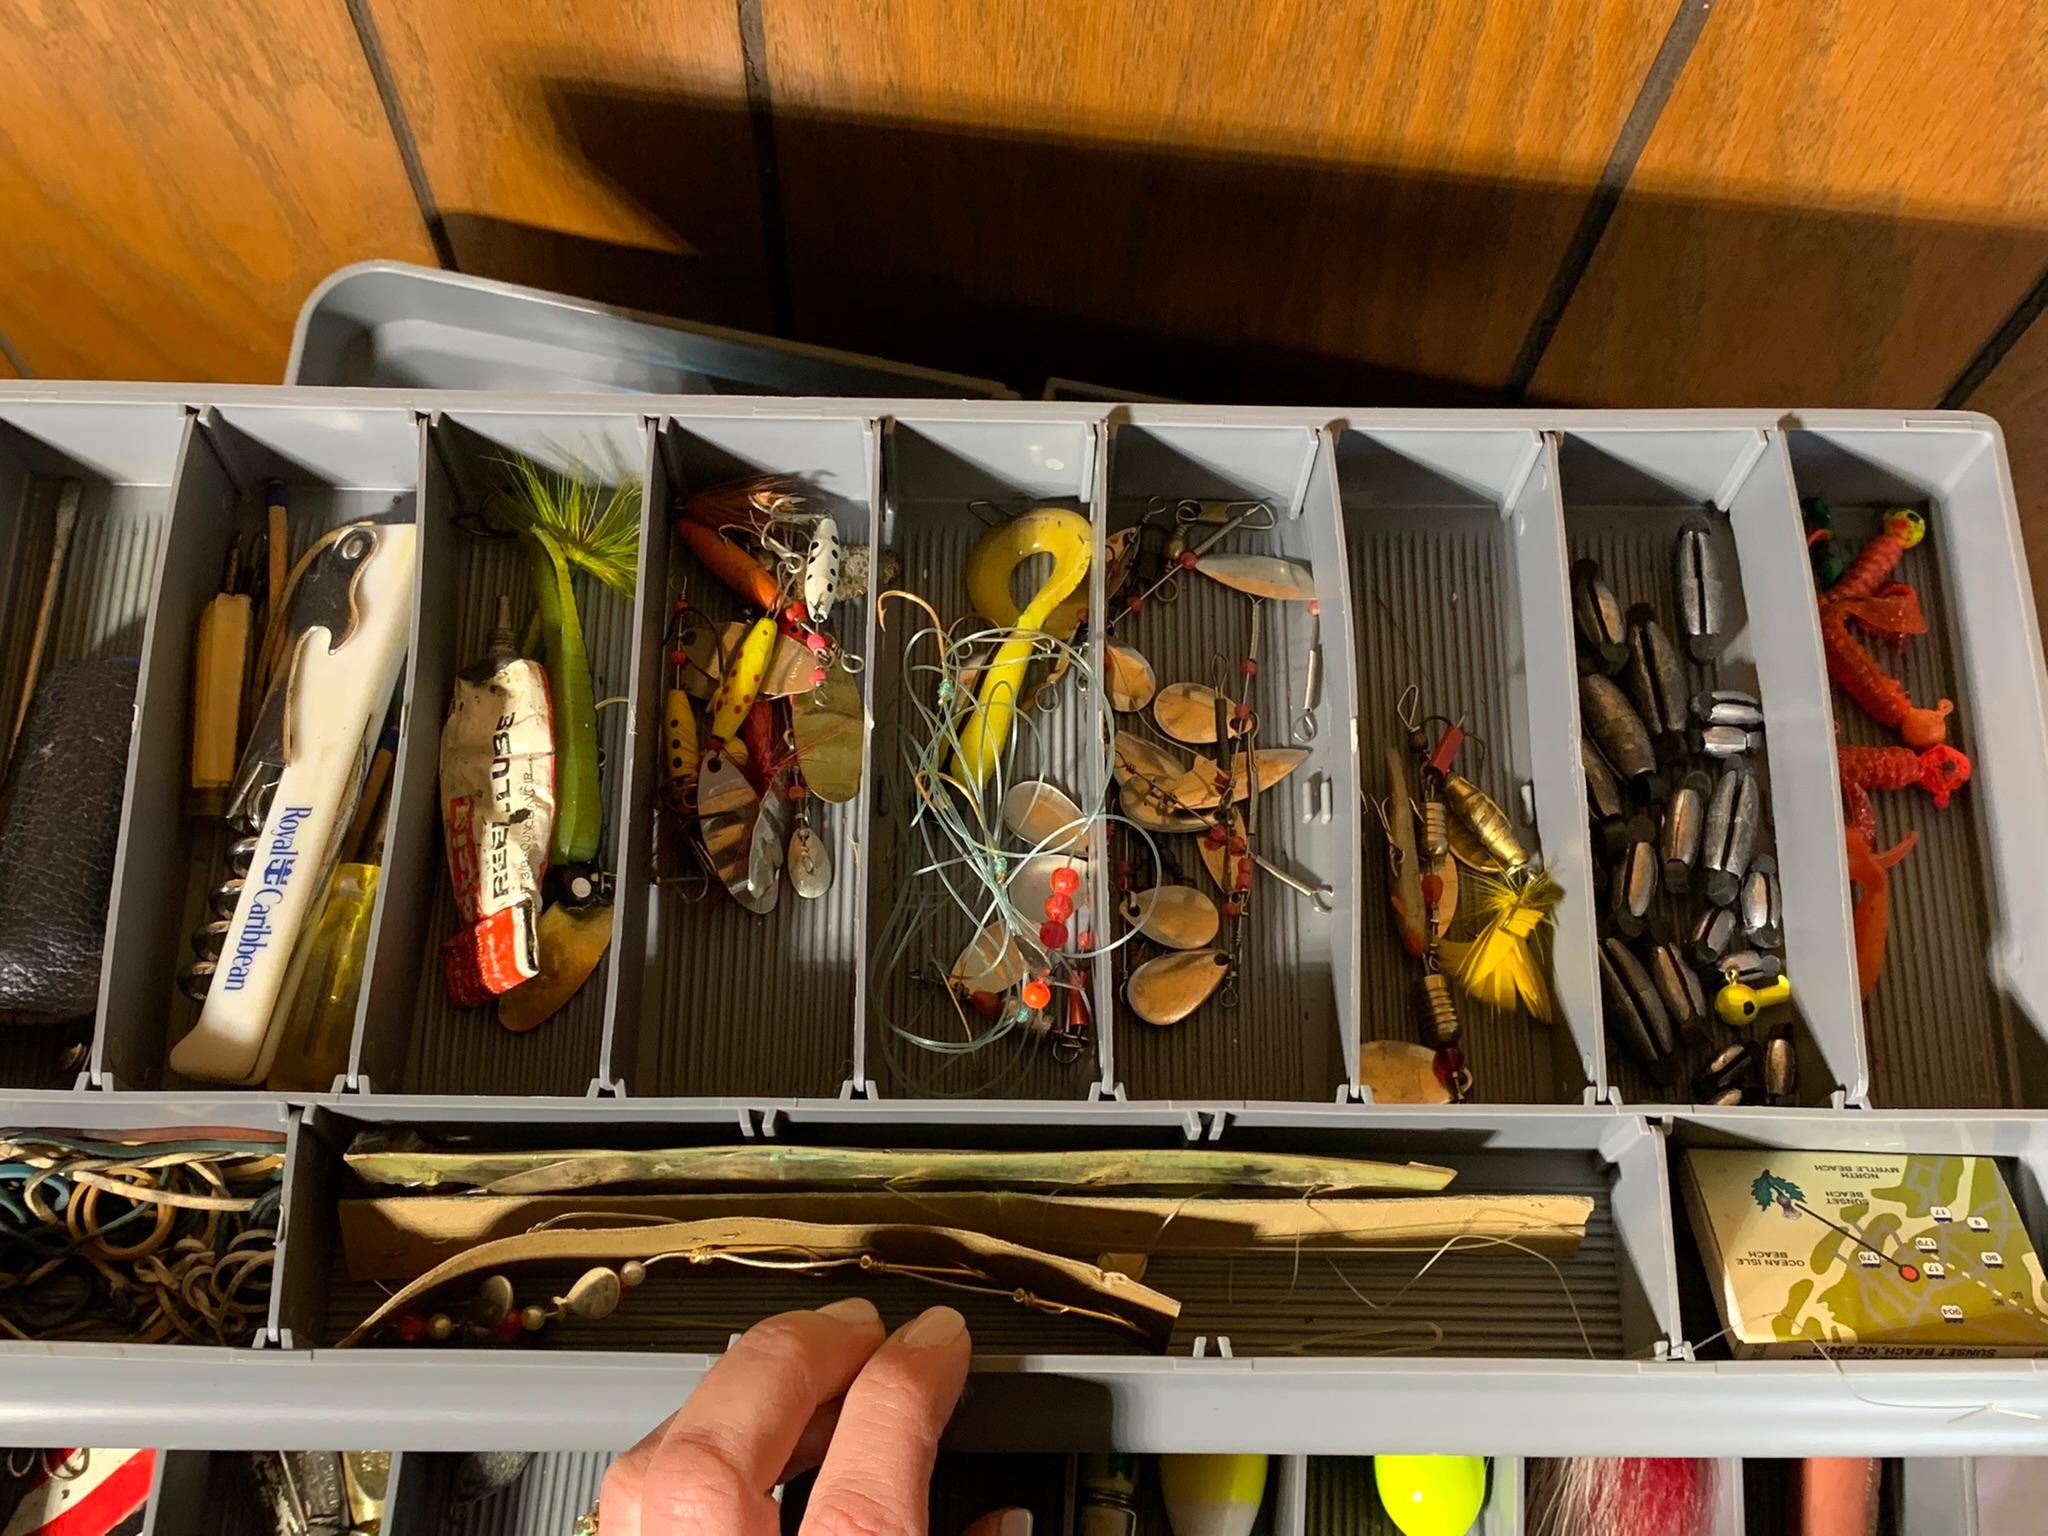 Tackle Box with Lures, Reel, Knife & More.  See Photos